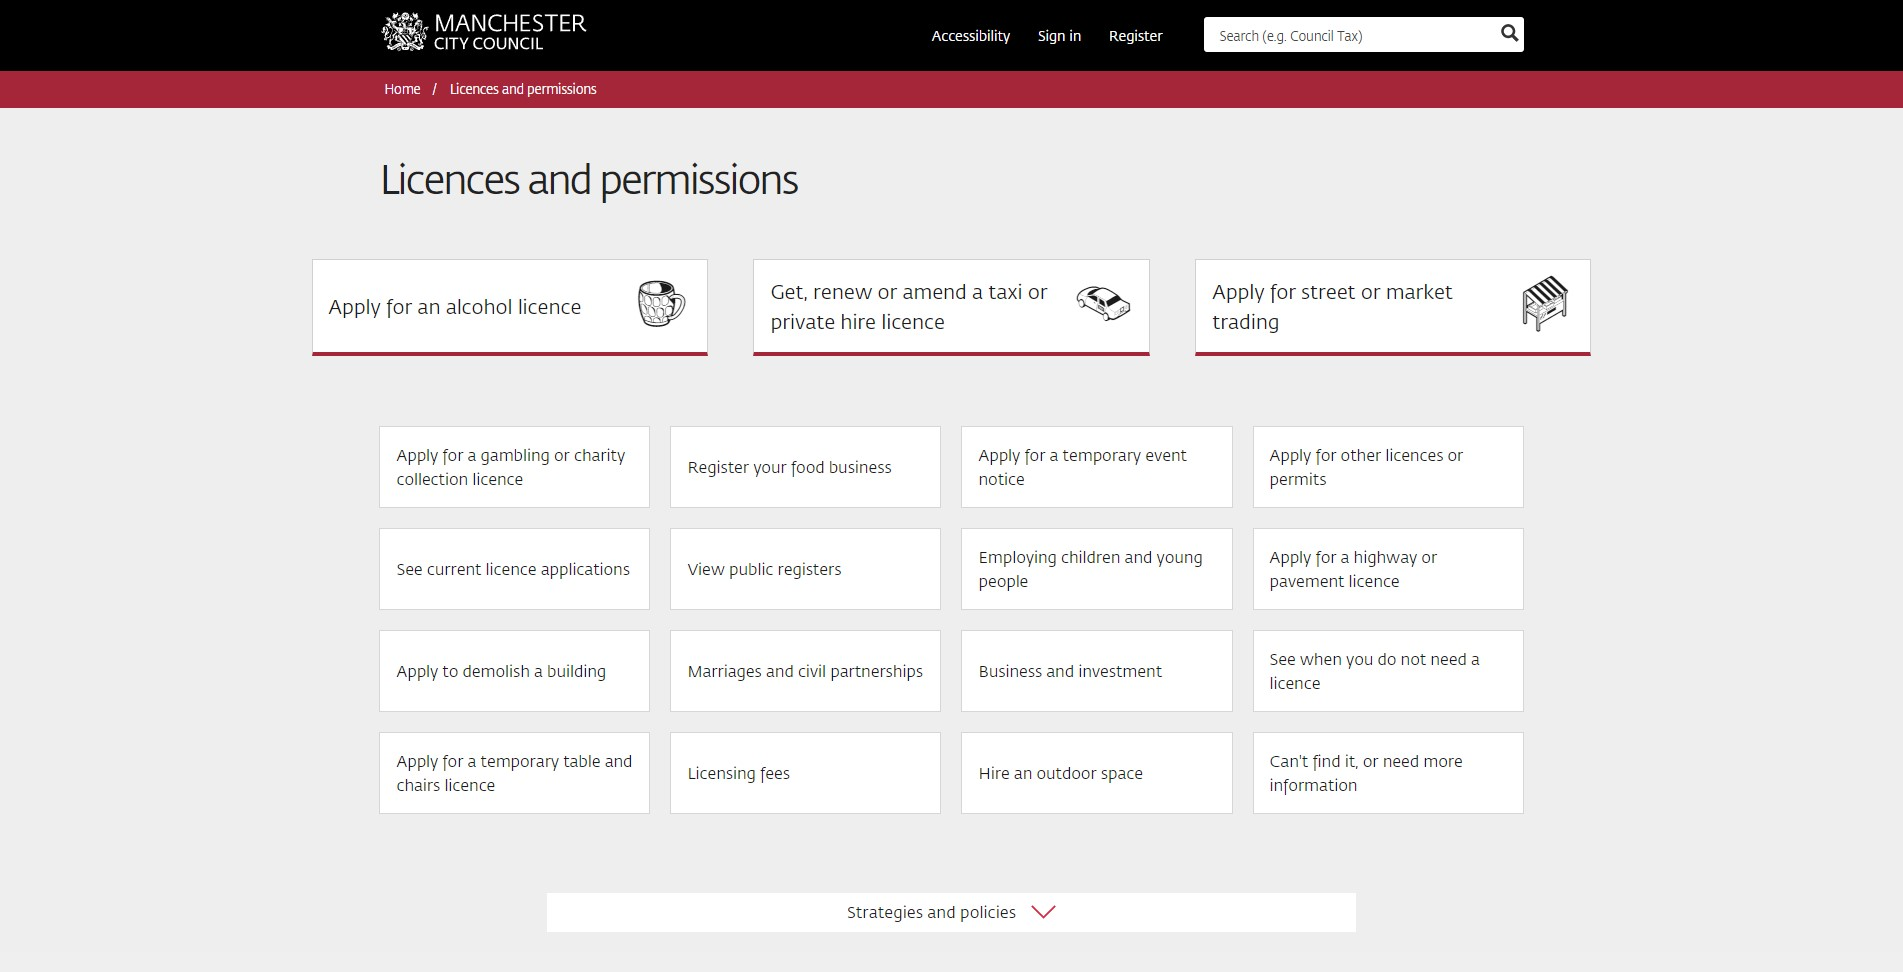 Manchester City Council website licences and permissions page